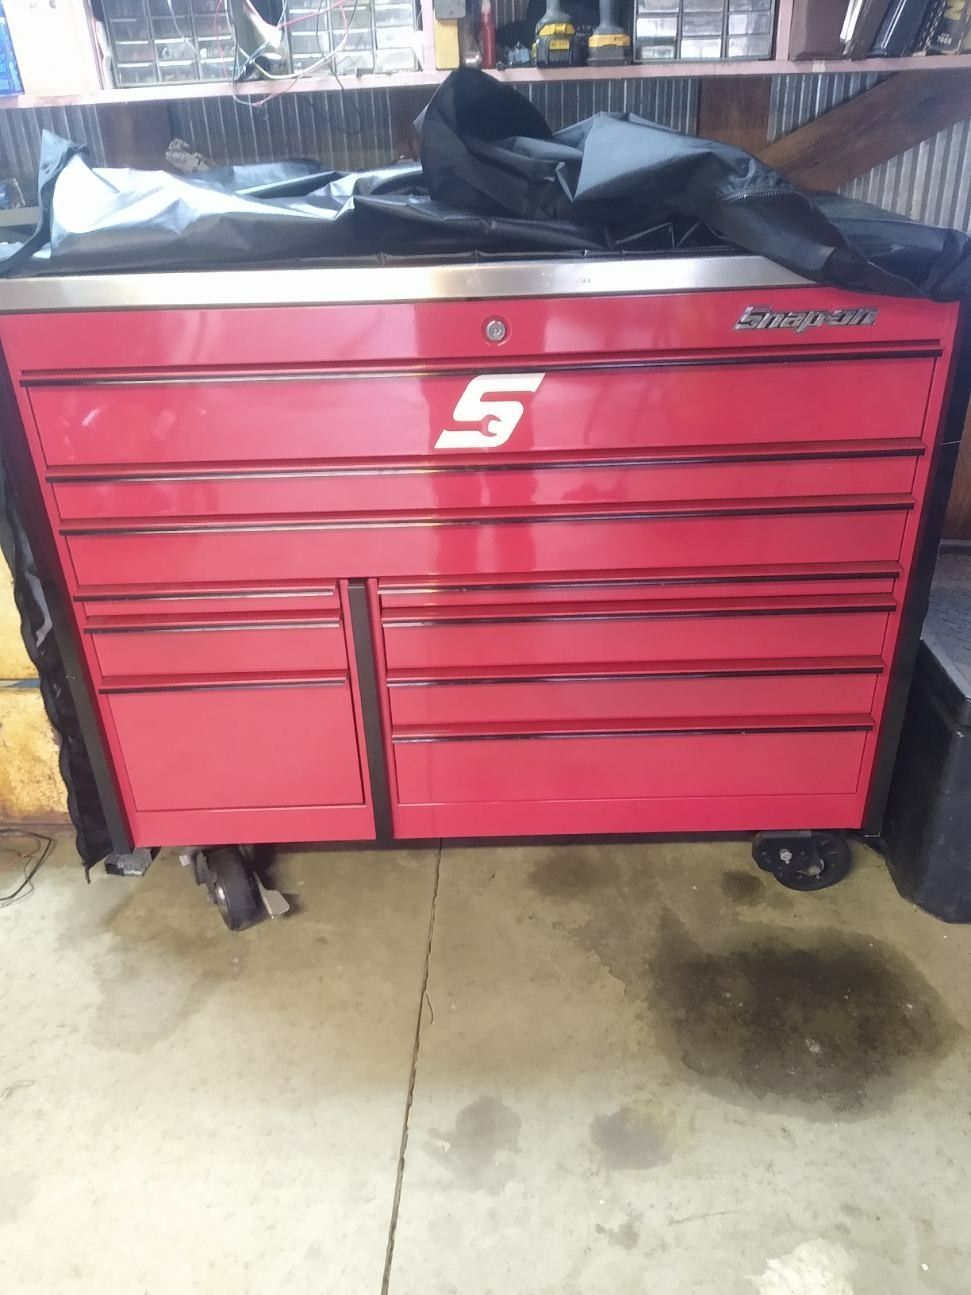 Snap on tool box KTL1022PPS